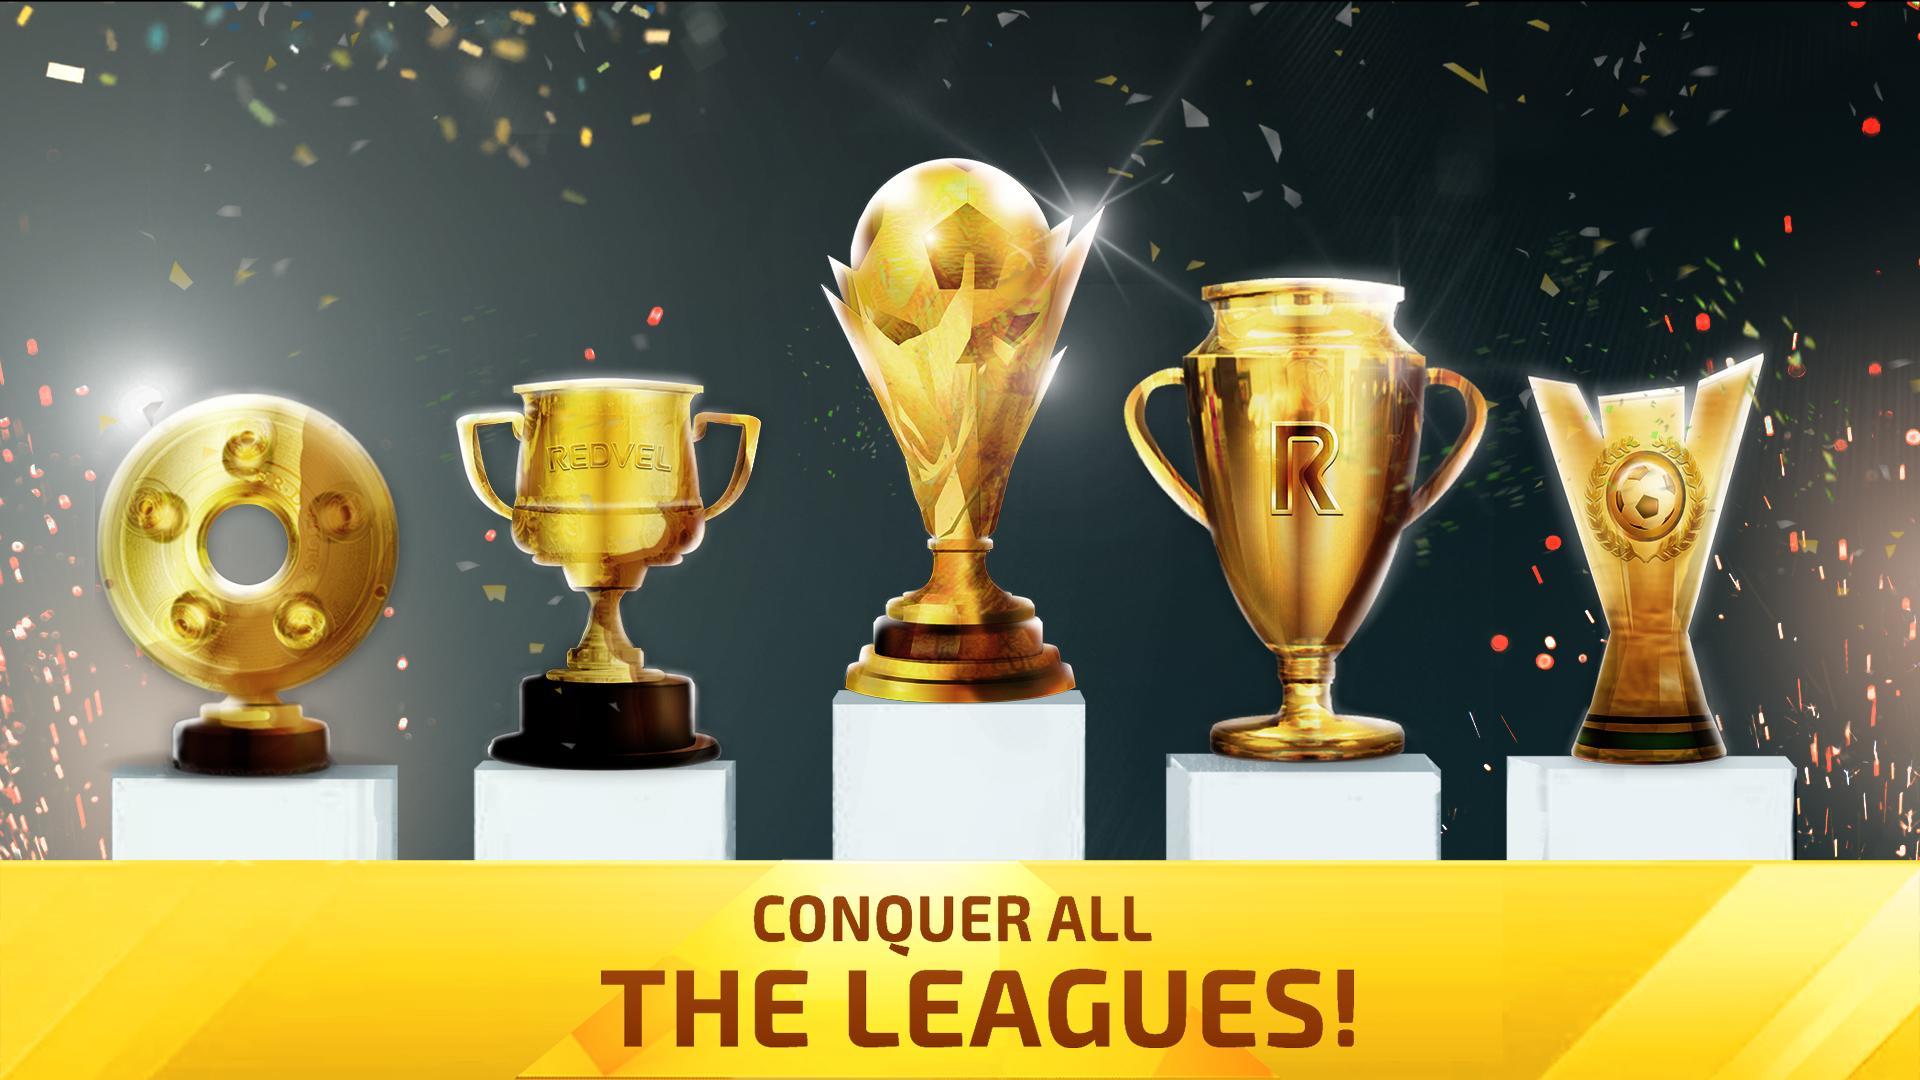 Soccer Star 2020 Top Leagues: Play the SOCCER game 2.4.0 Screenshot 6